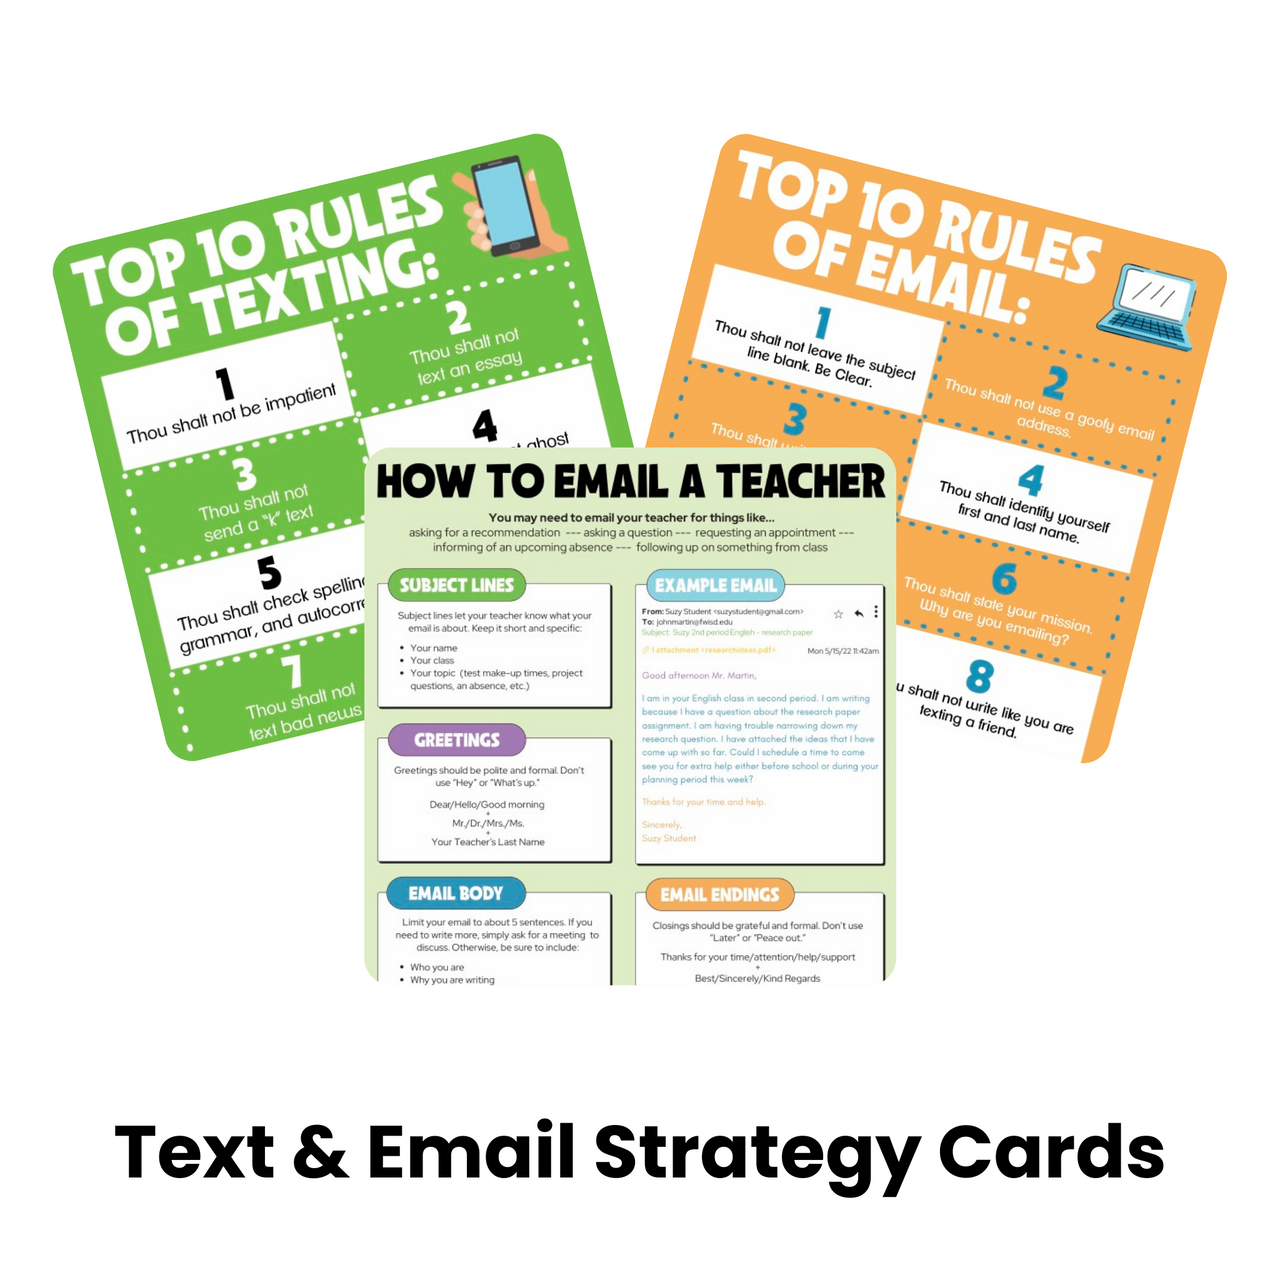 Text & Email Strategy Cards